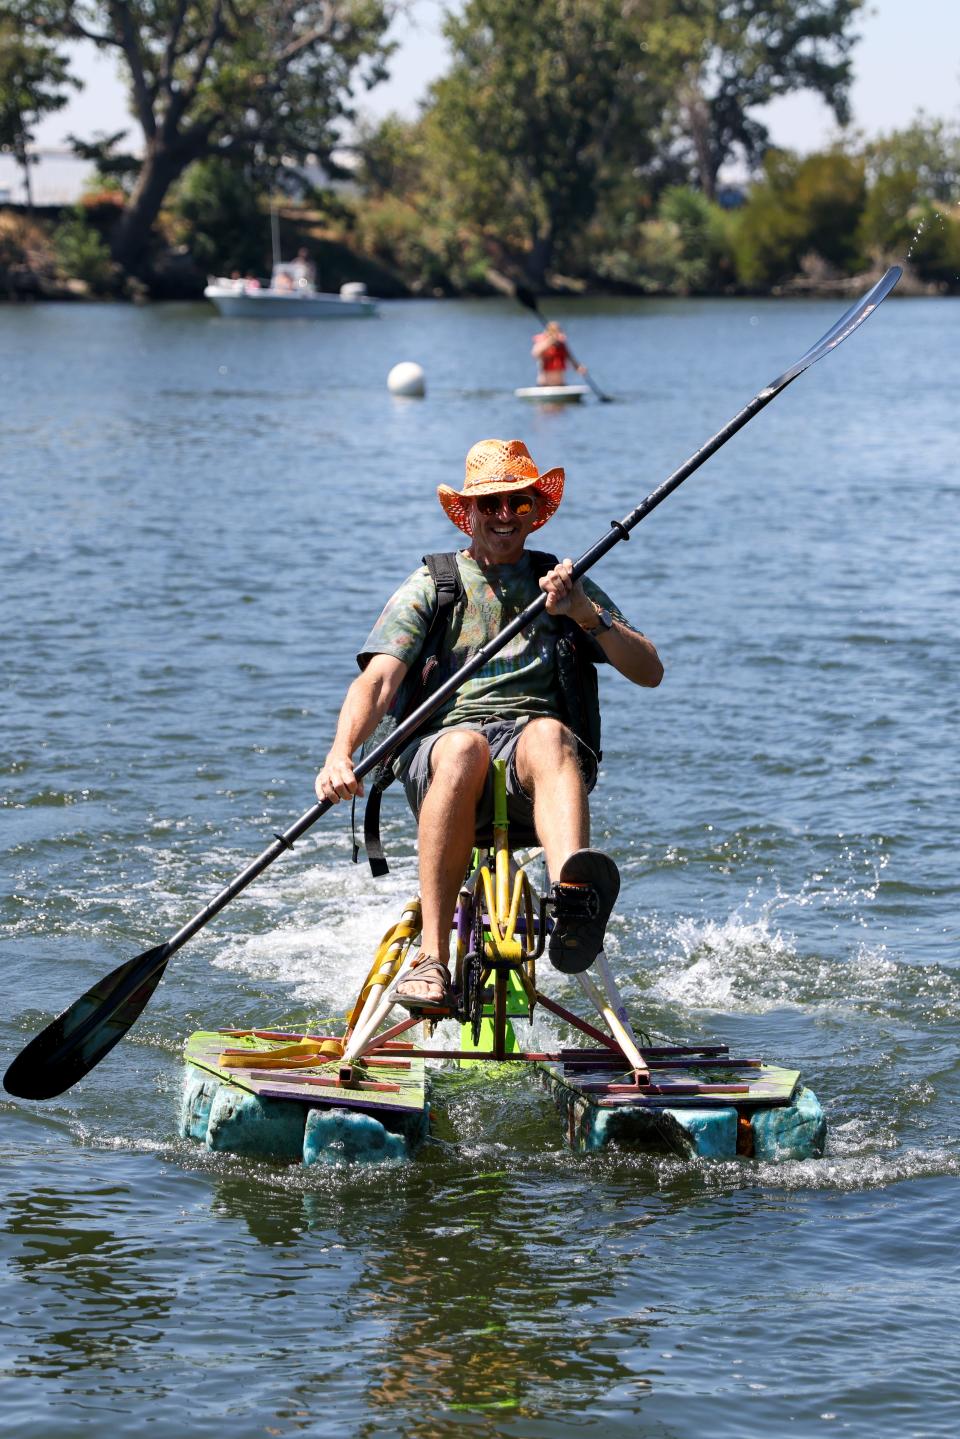 Justin Grant pedaled his way to 2nd place in this year's Bathtub Boat Race.  The 13th annual event was pushed down the Delta from its usual launching spot, but diehards showed up to put on a show for friends and family.